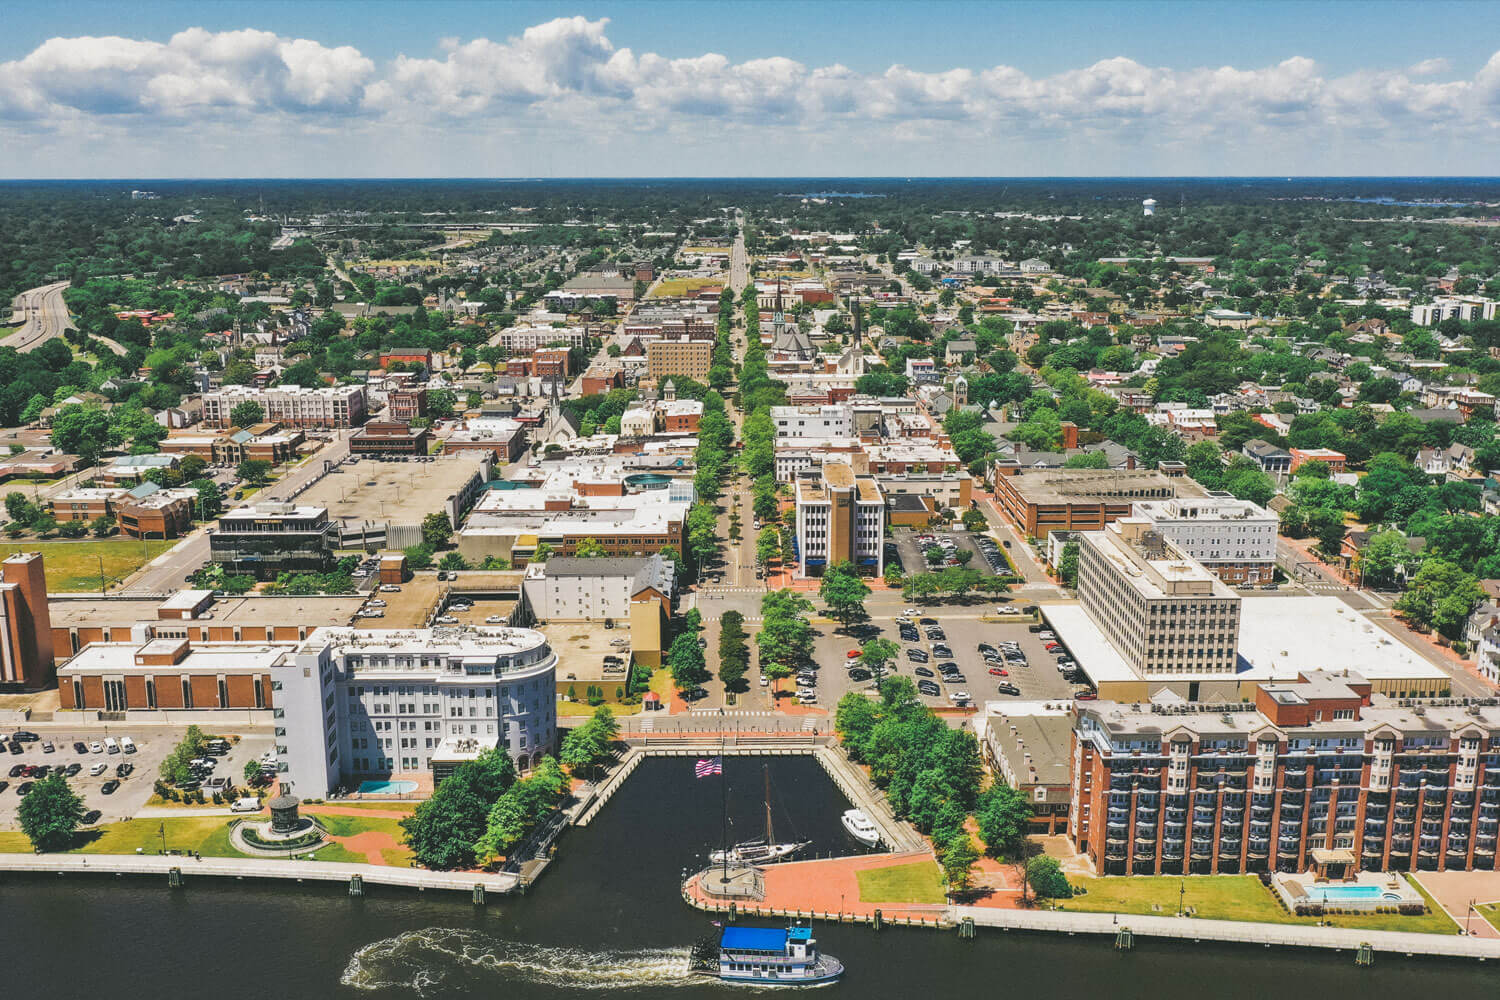 Birds-eye view of the Portsmouth waterfront.